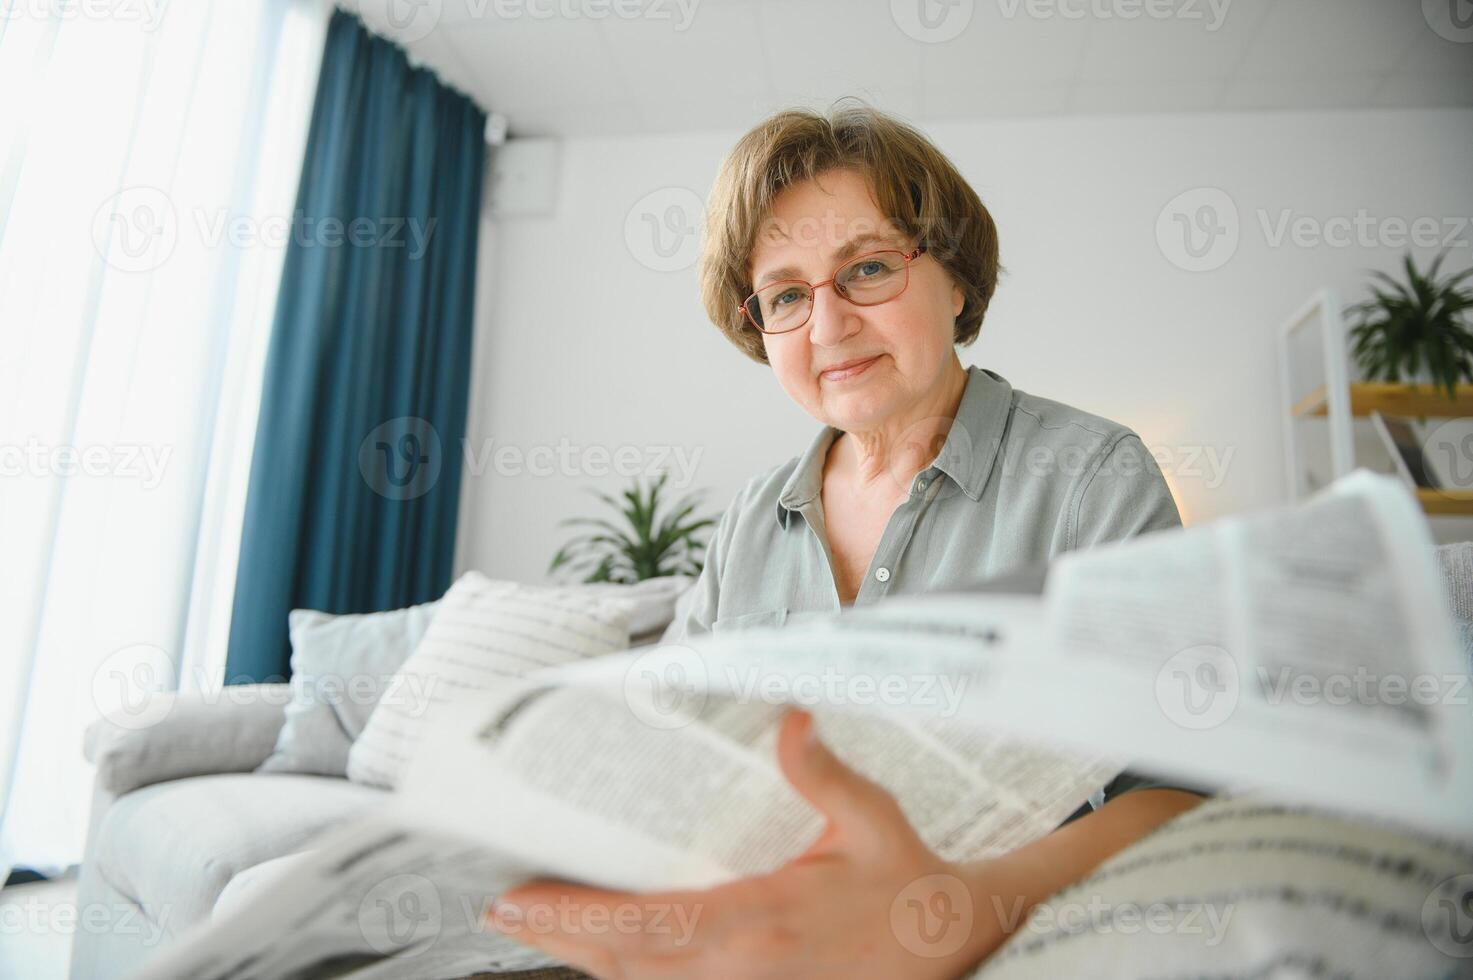 Older woman eelaxing and reading newspaper photo